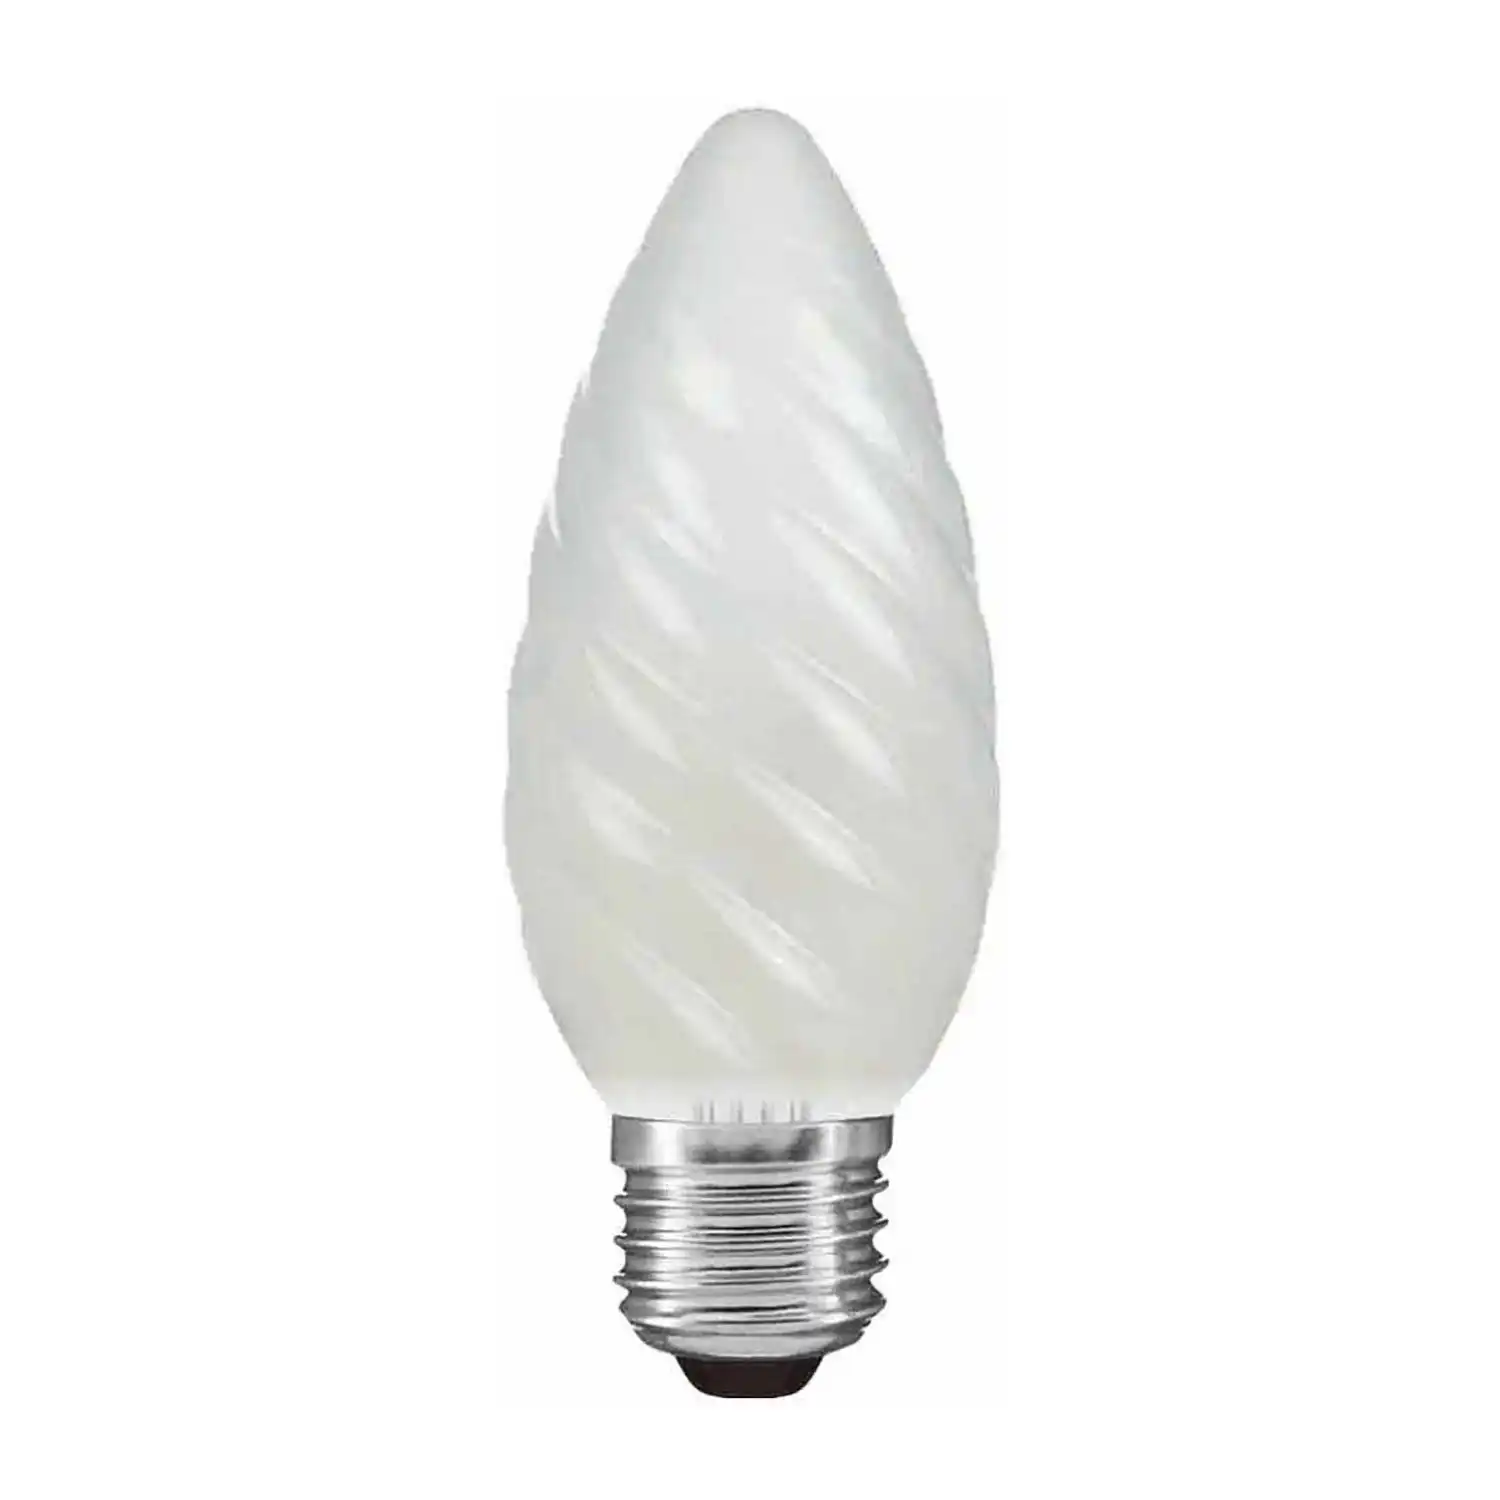 Candle 45mm Twisted Frosted E27 40W (100 10)